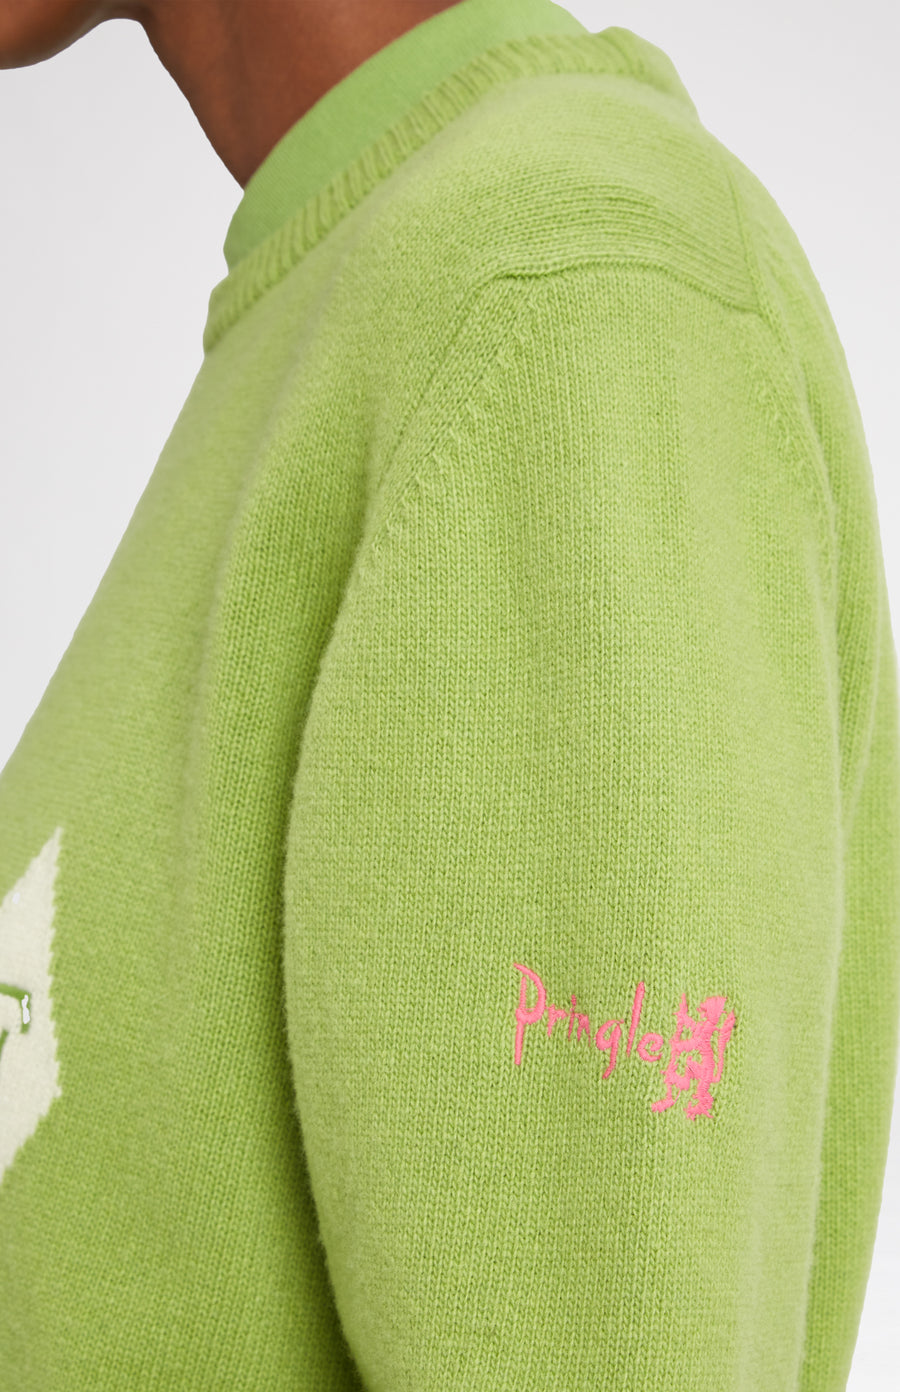 Unisex heritage diamond motif golf jumper in Green and Ivory embroidery detail - Pringle of Scotland